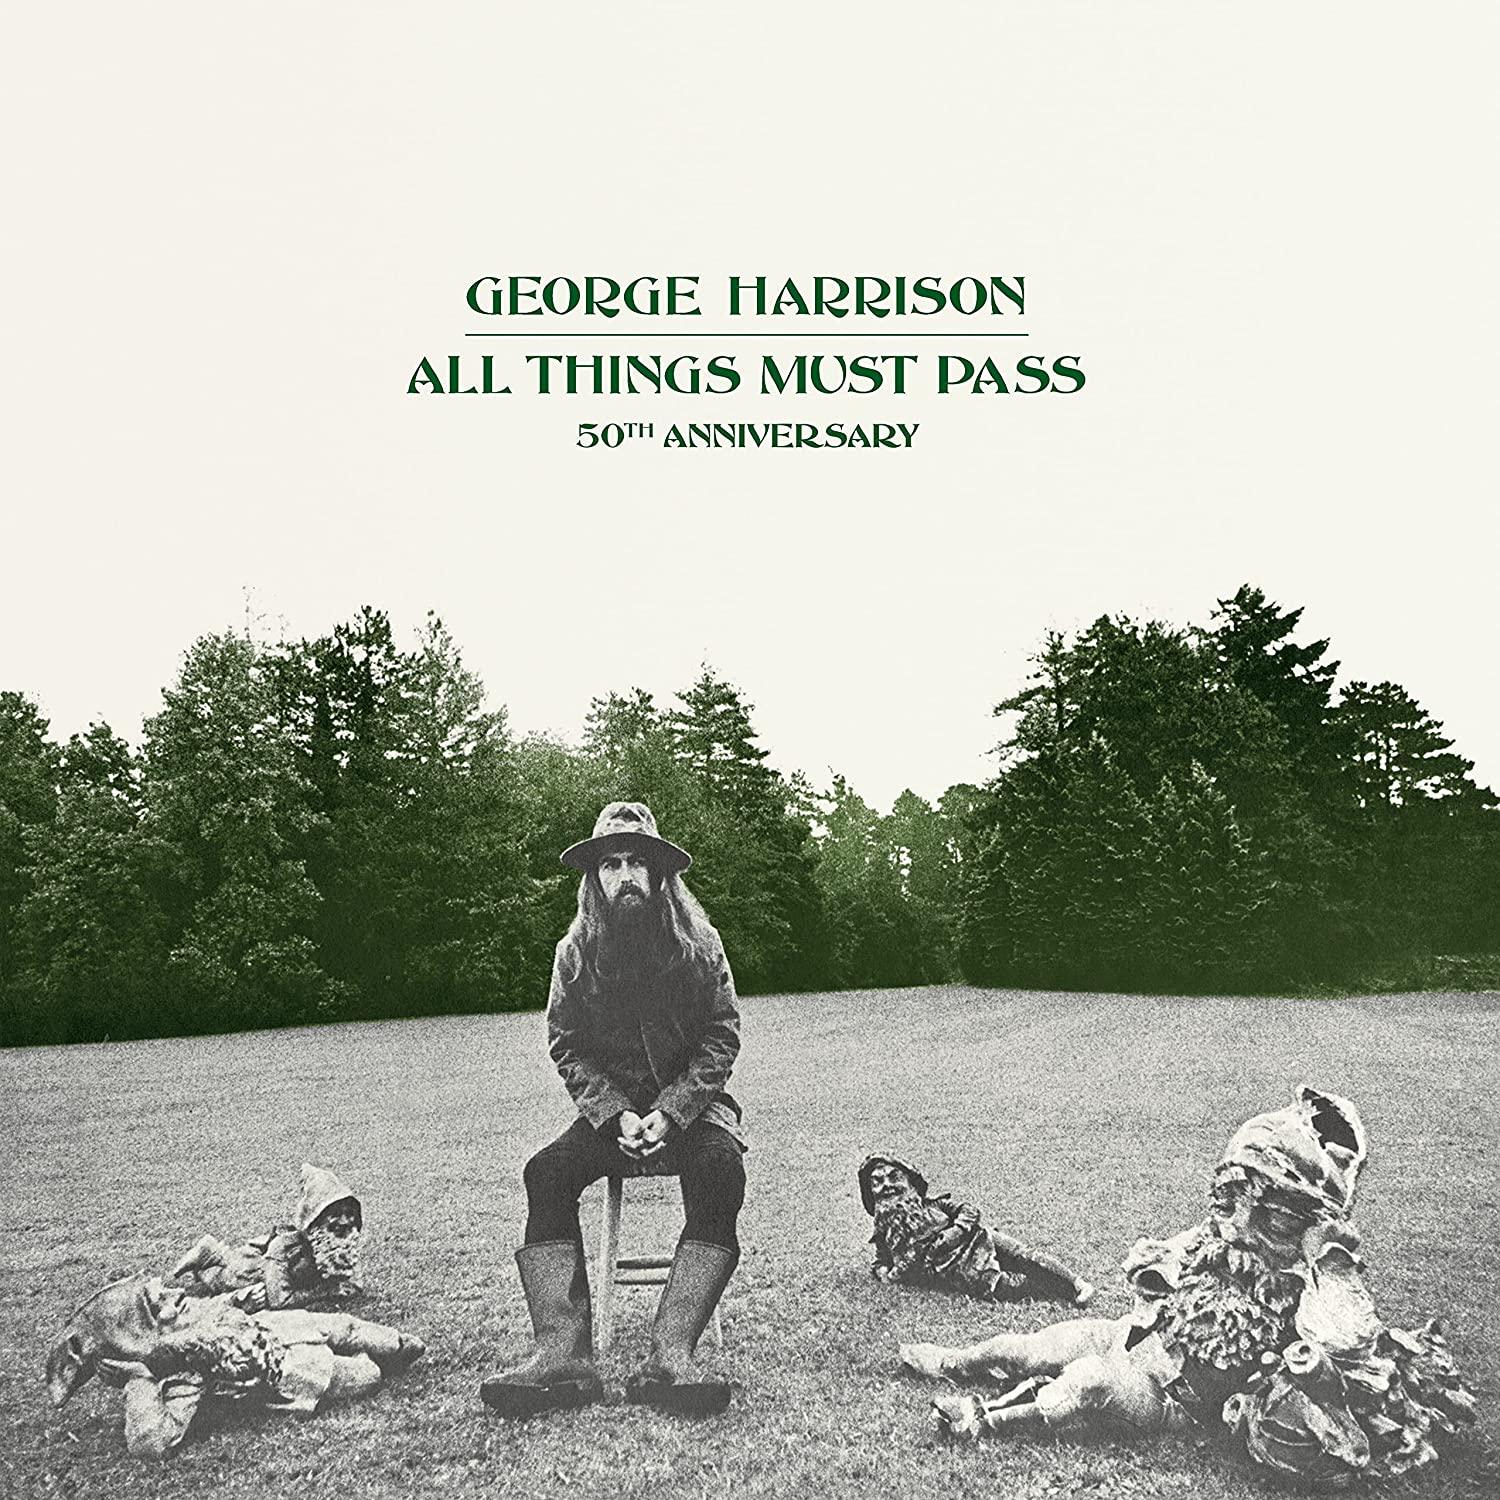 George Harrison - All Things Must Pass (Super Deluxe Box Set) (Remastered, 180 Gram) (8 LP) - Joco Records